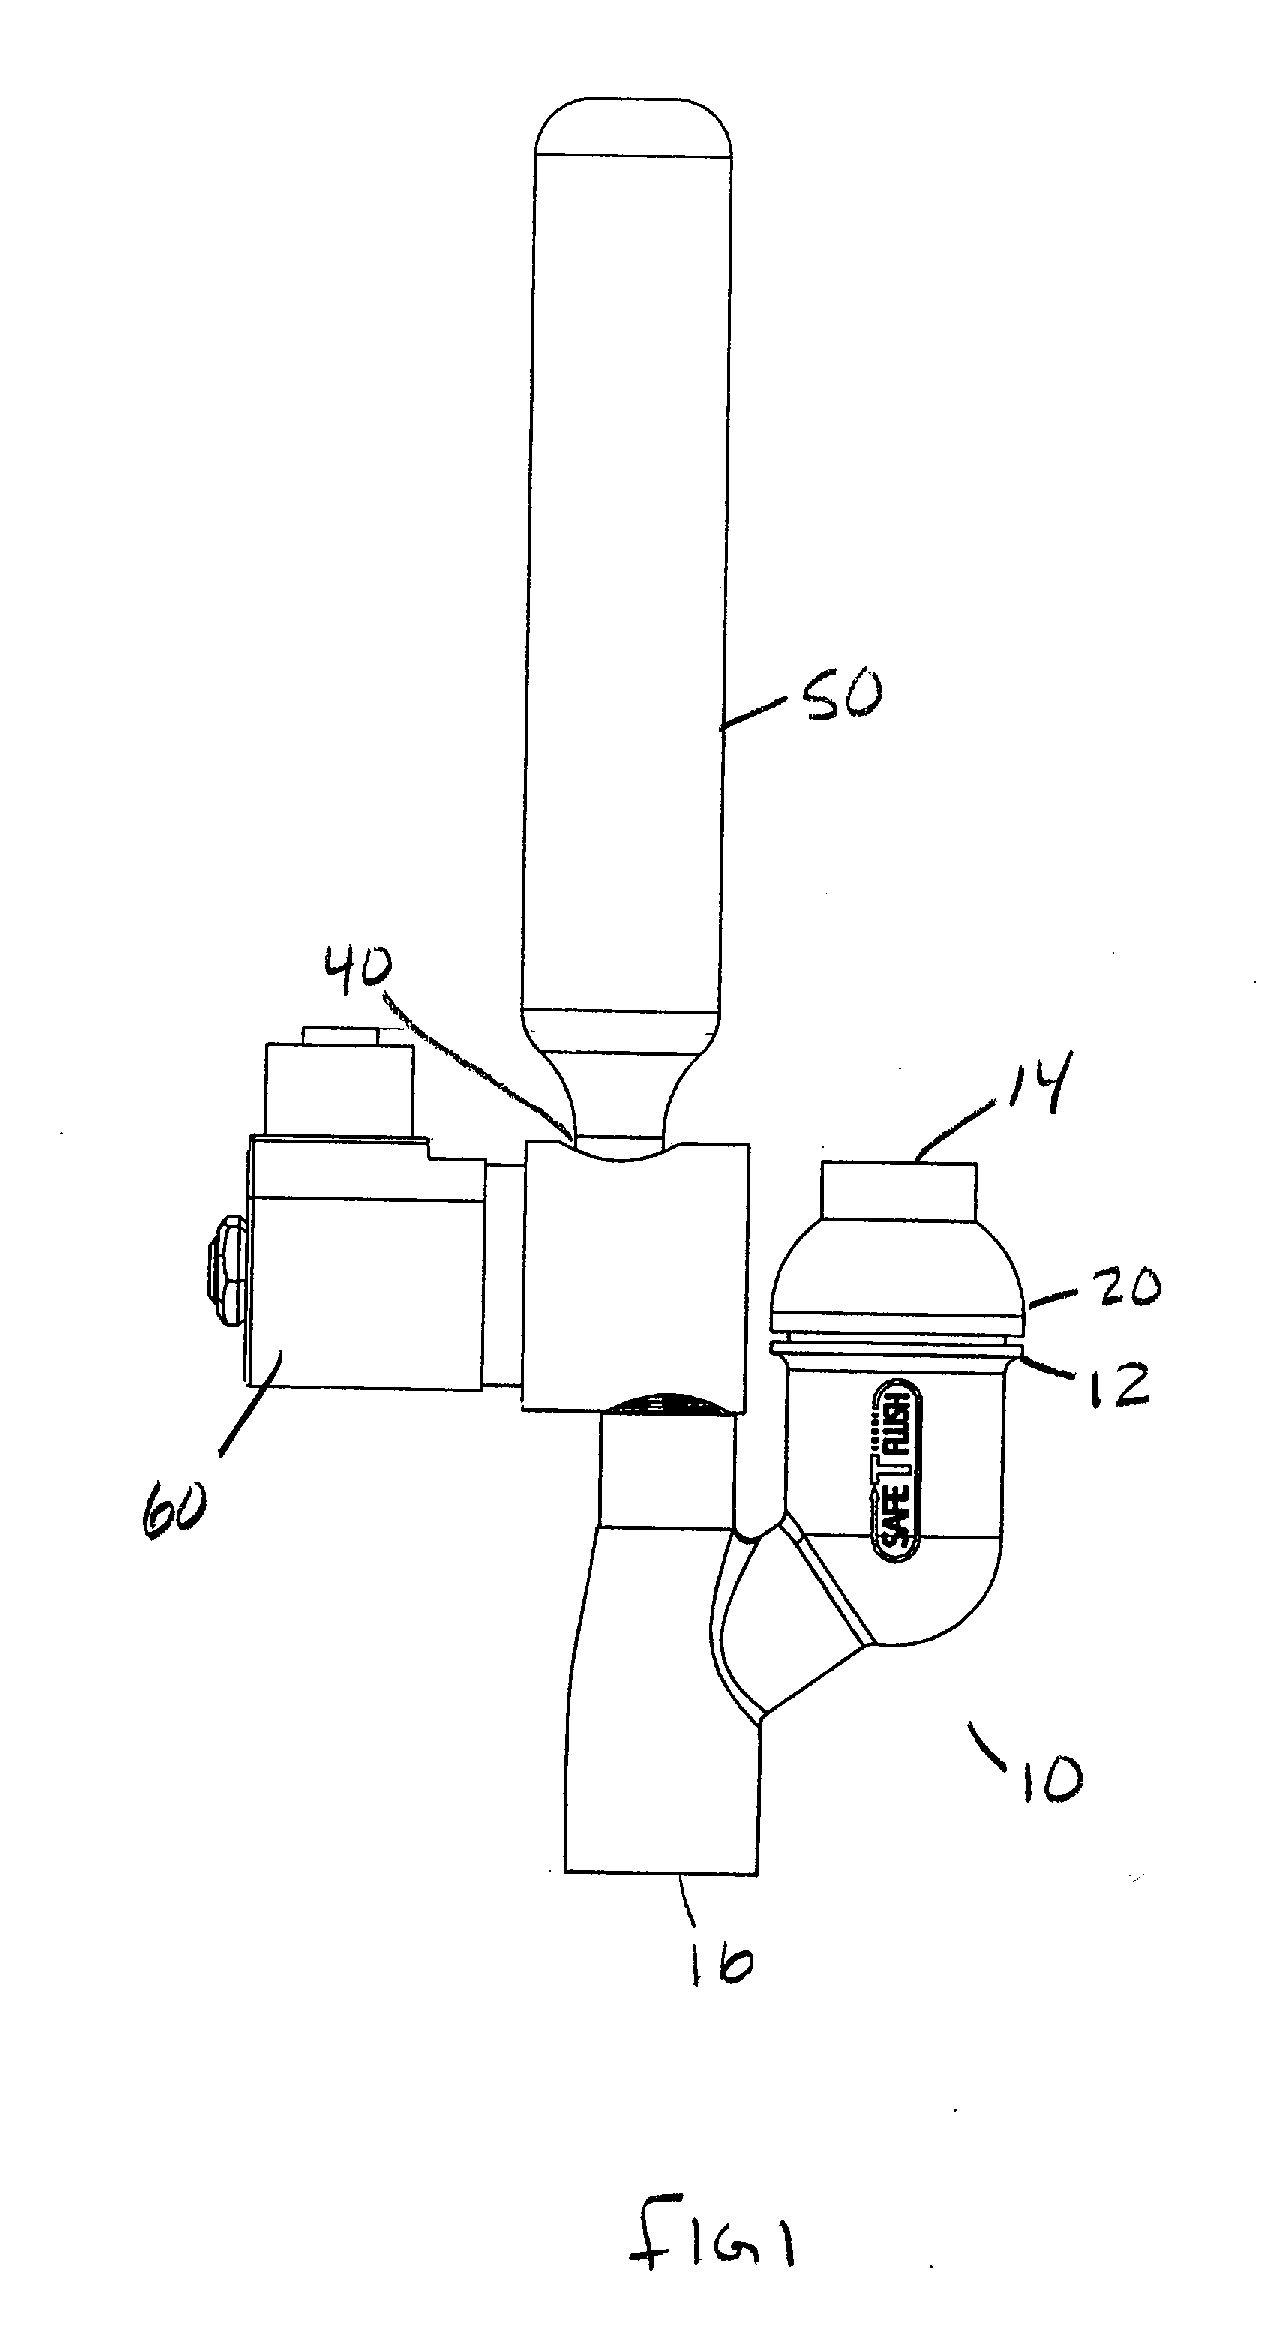 Automatic purging device for ac condensation drain lines